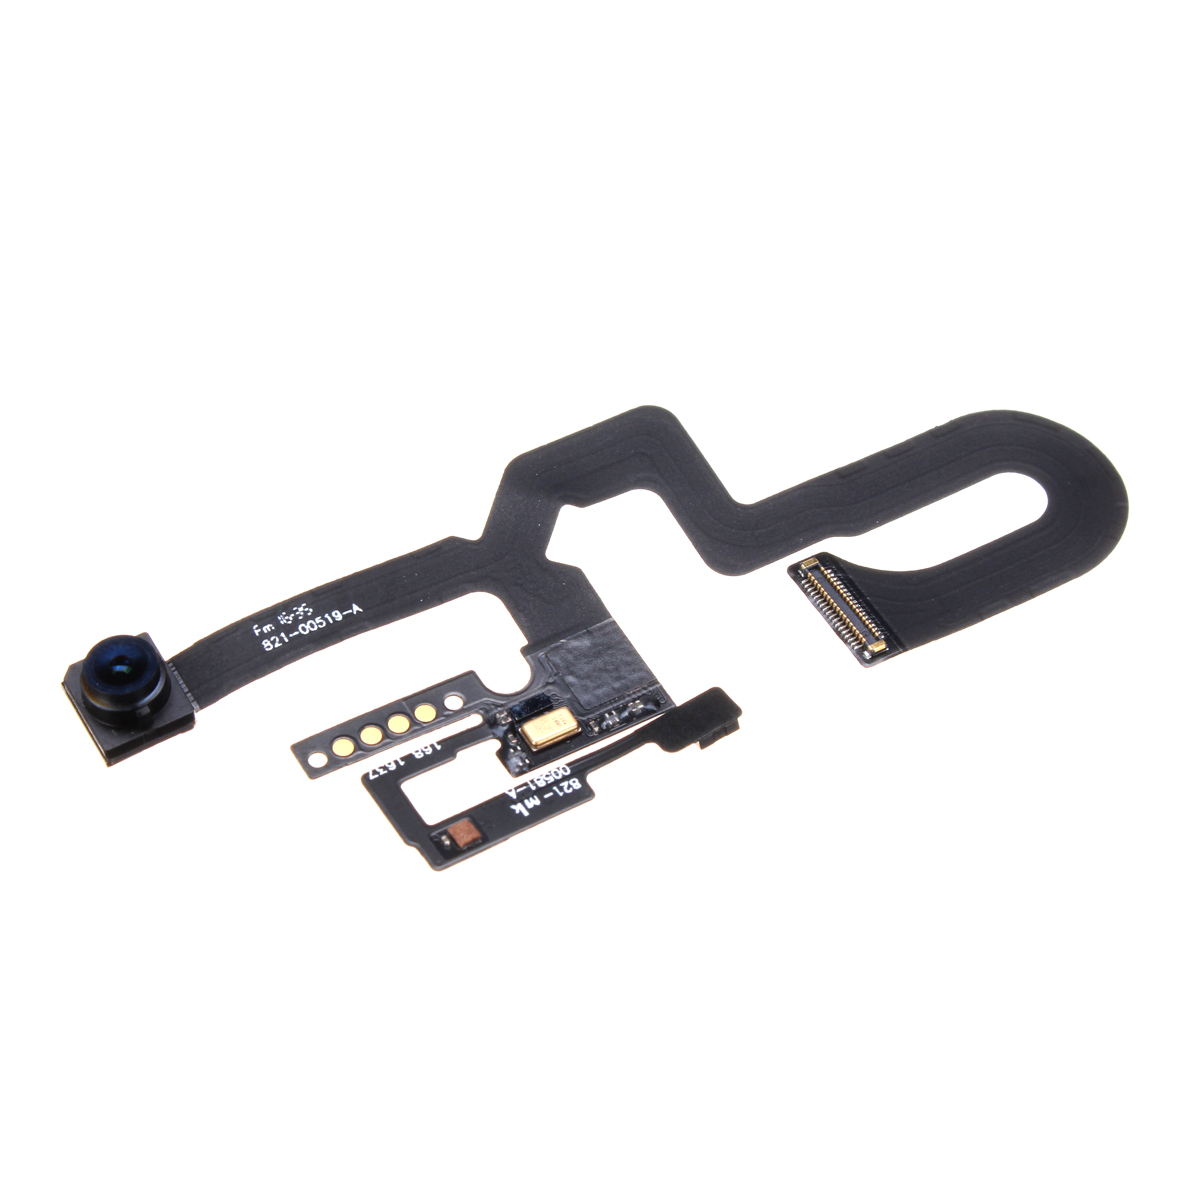 Front-Camera-Proximity-Light-Sensor-Flex-Cable-Replacement-for-iPhone-7-Plus-1316402